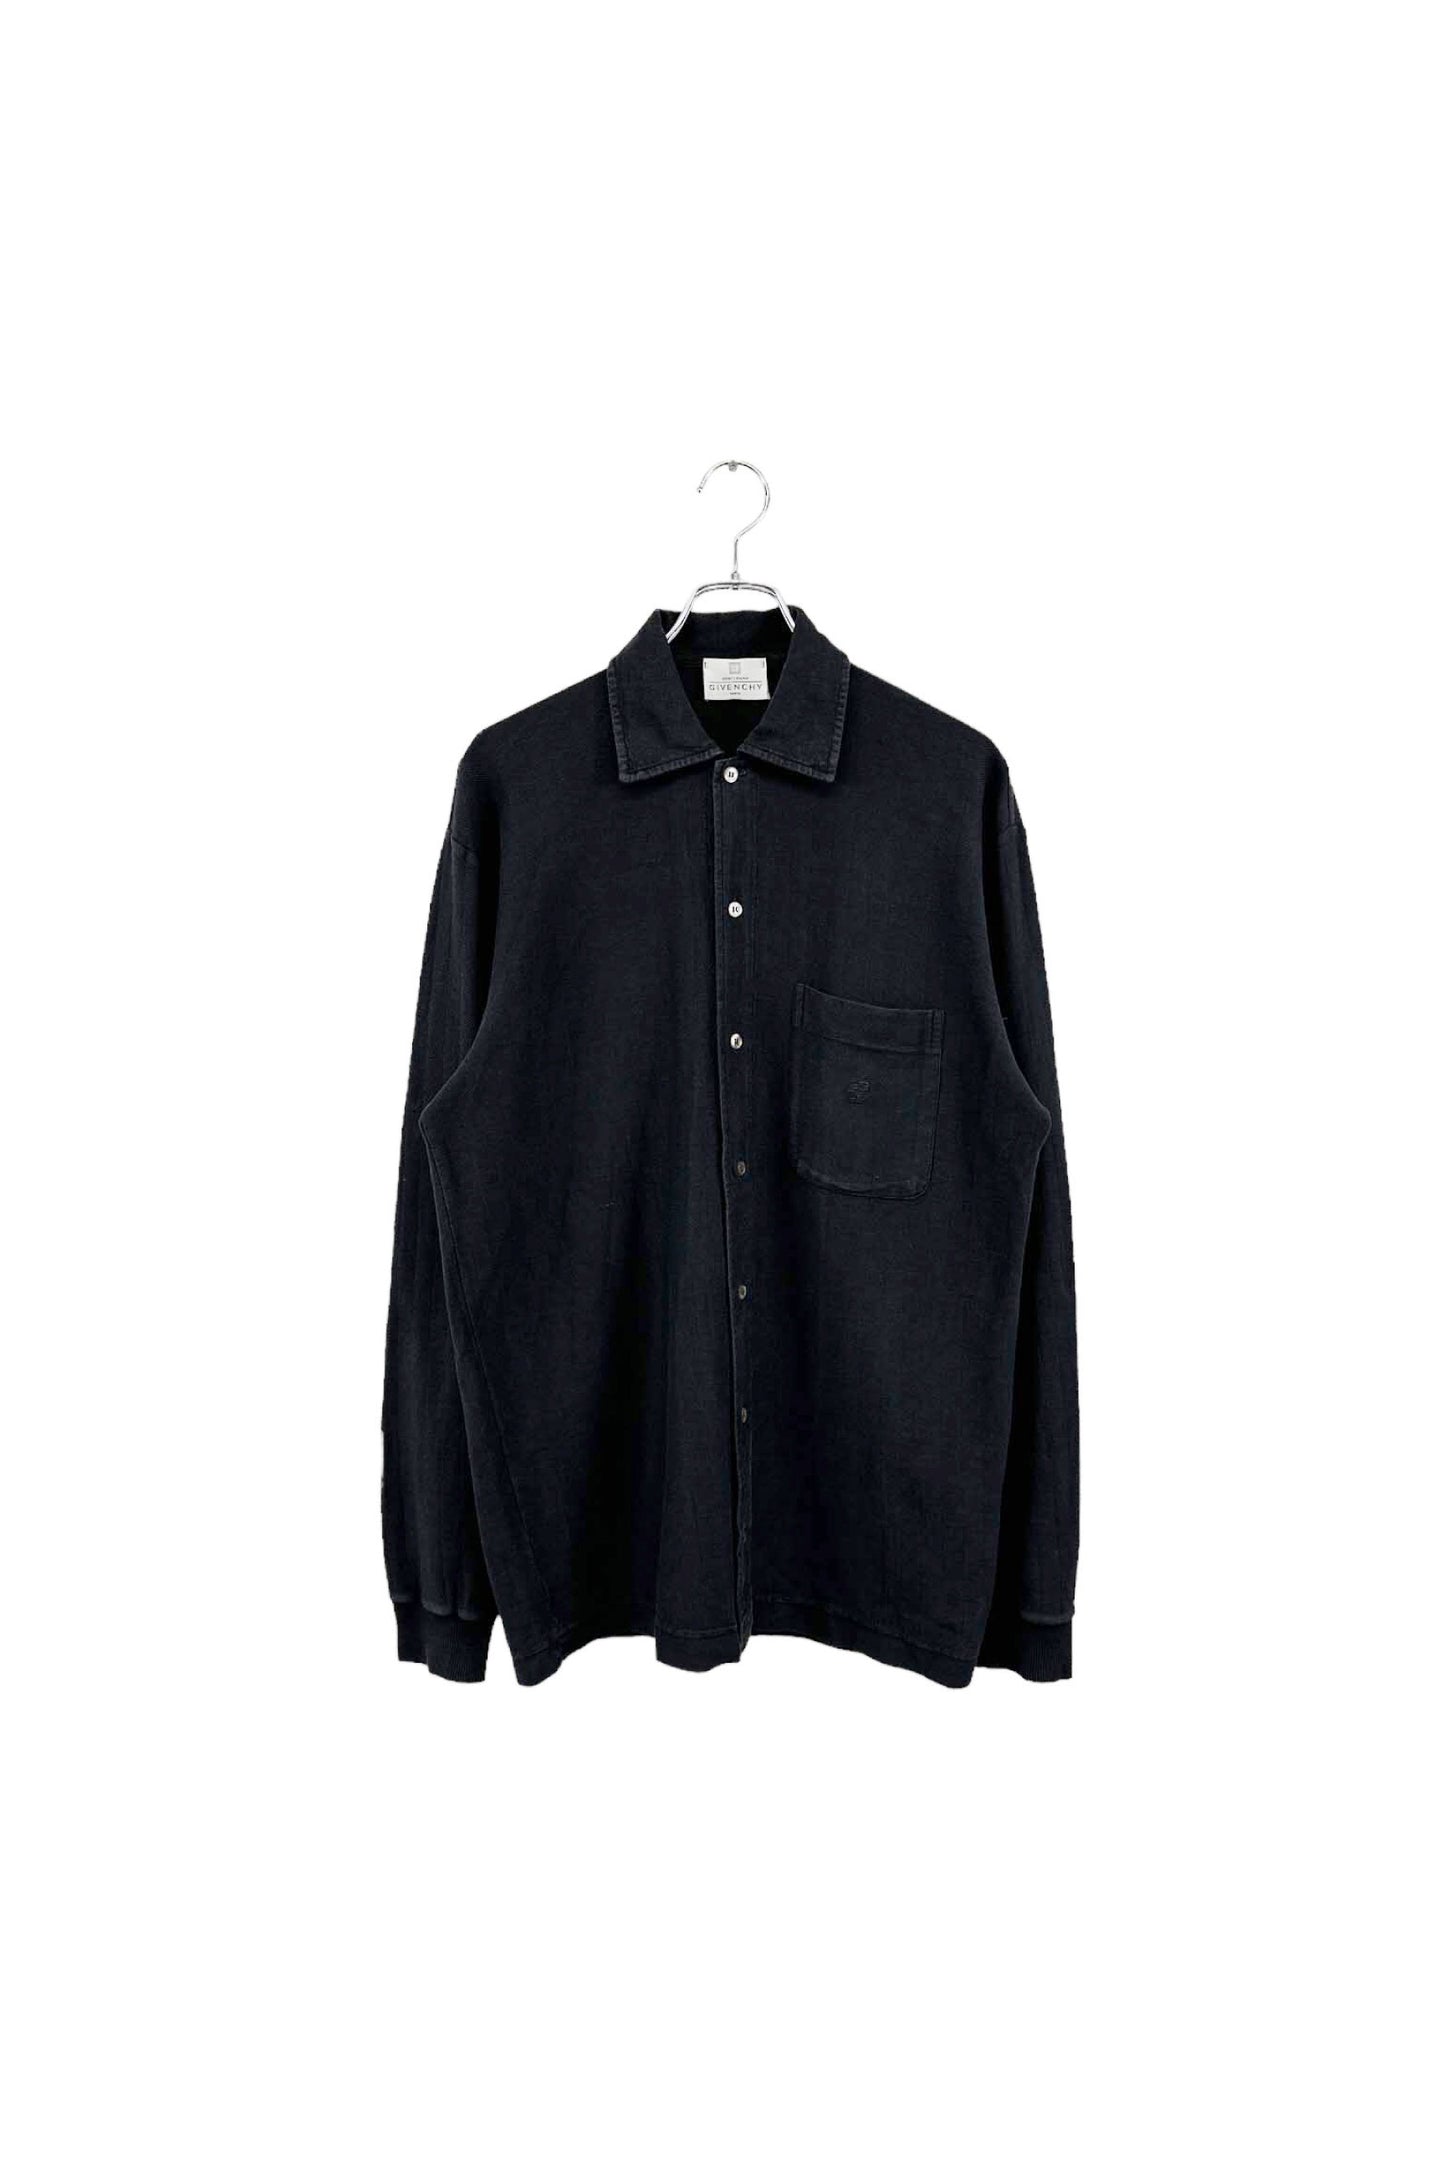 Made in ITALY black shirt